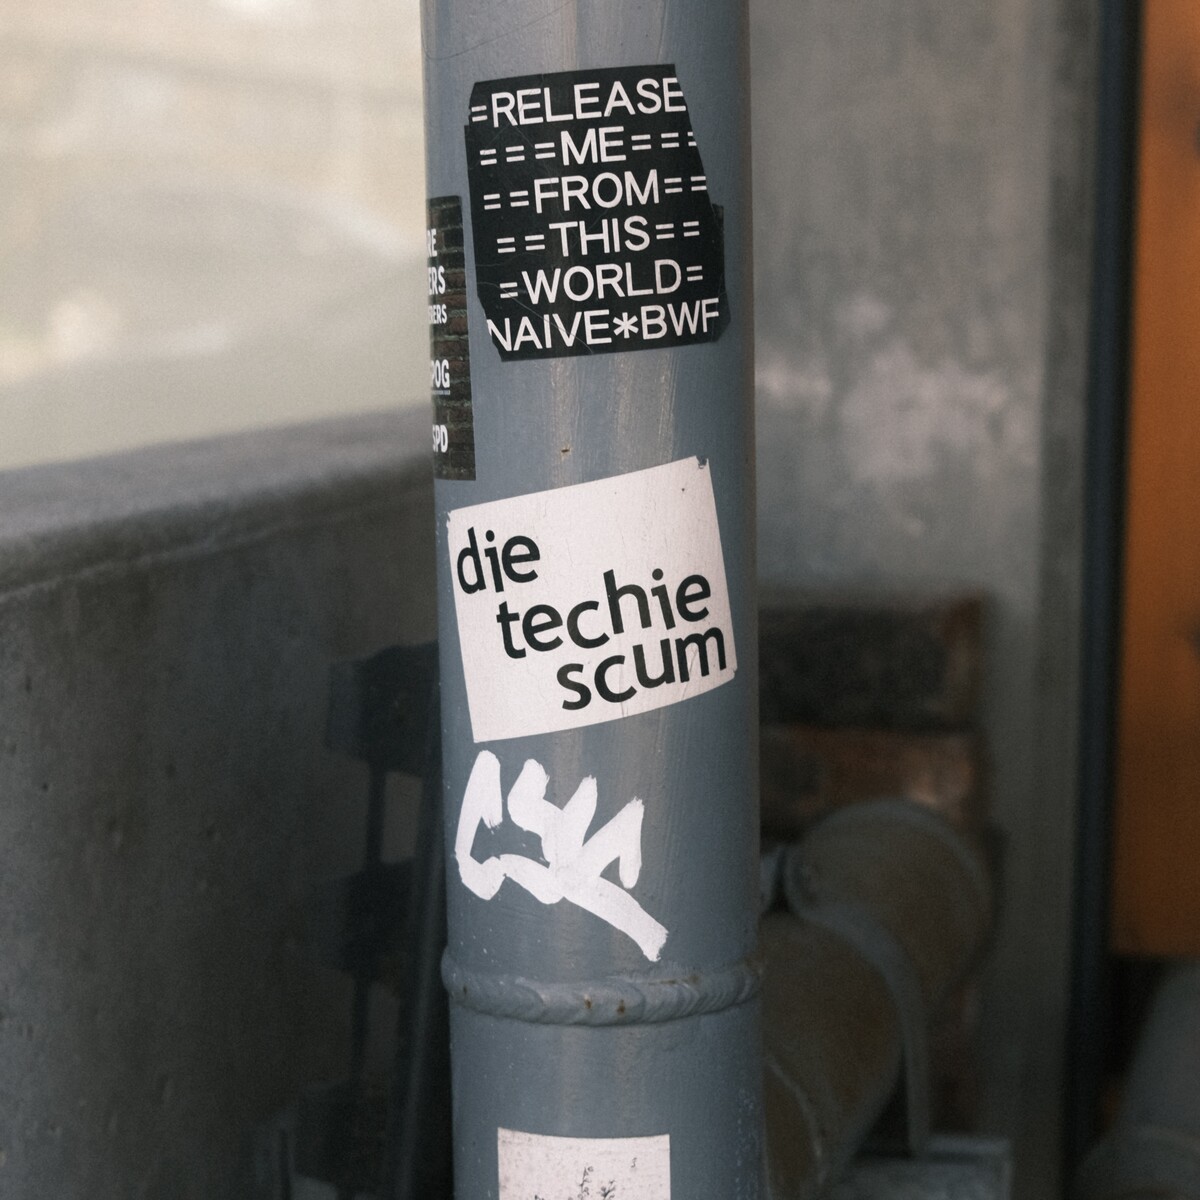 Sticker on the street that has an anti-tech message.